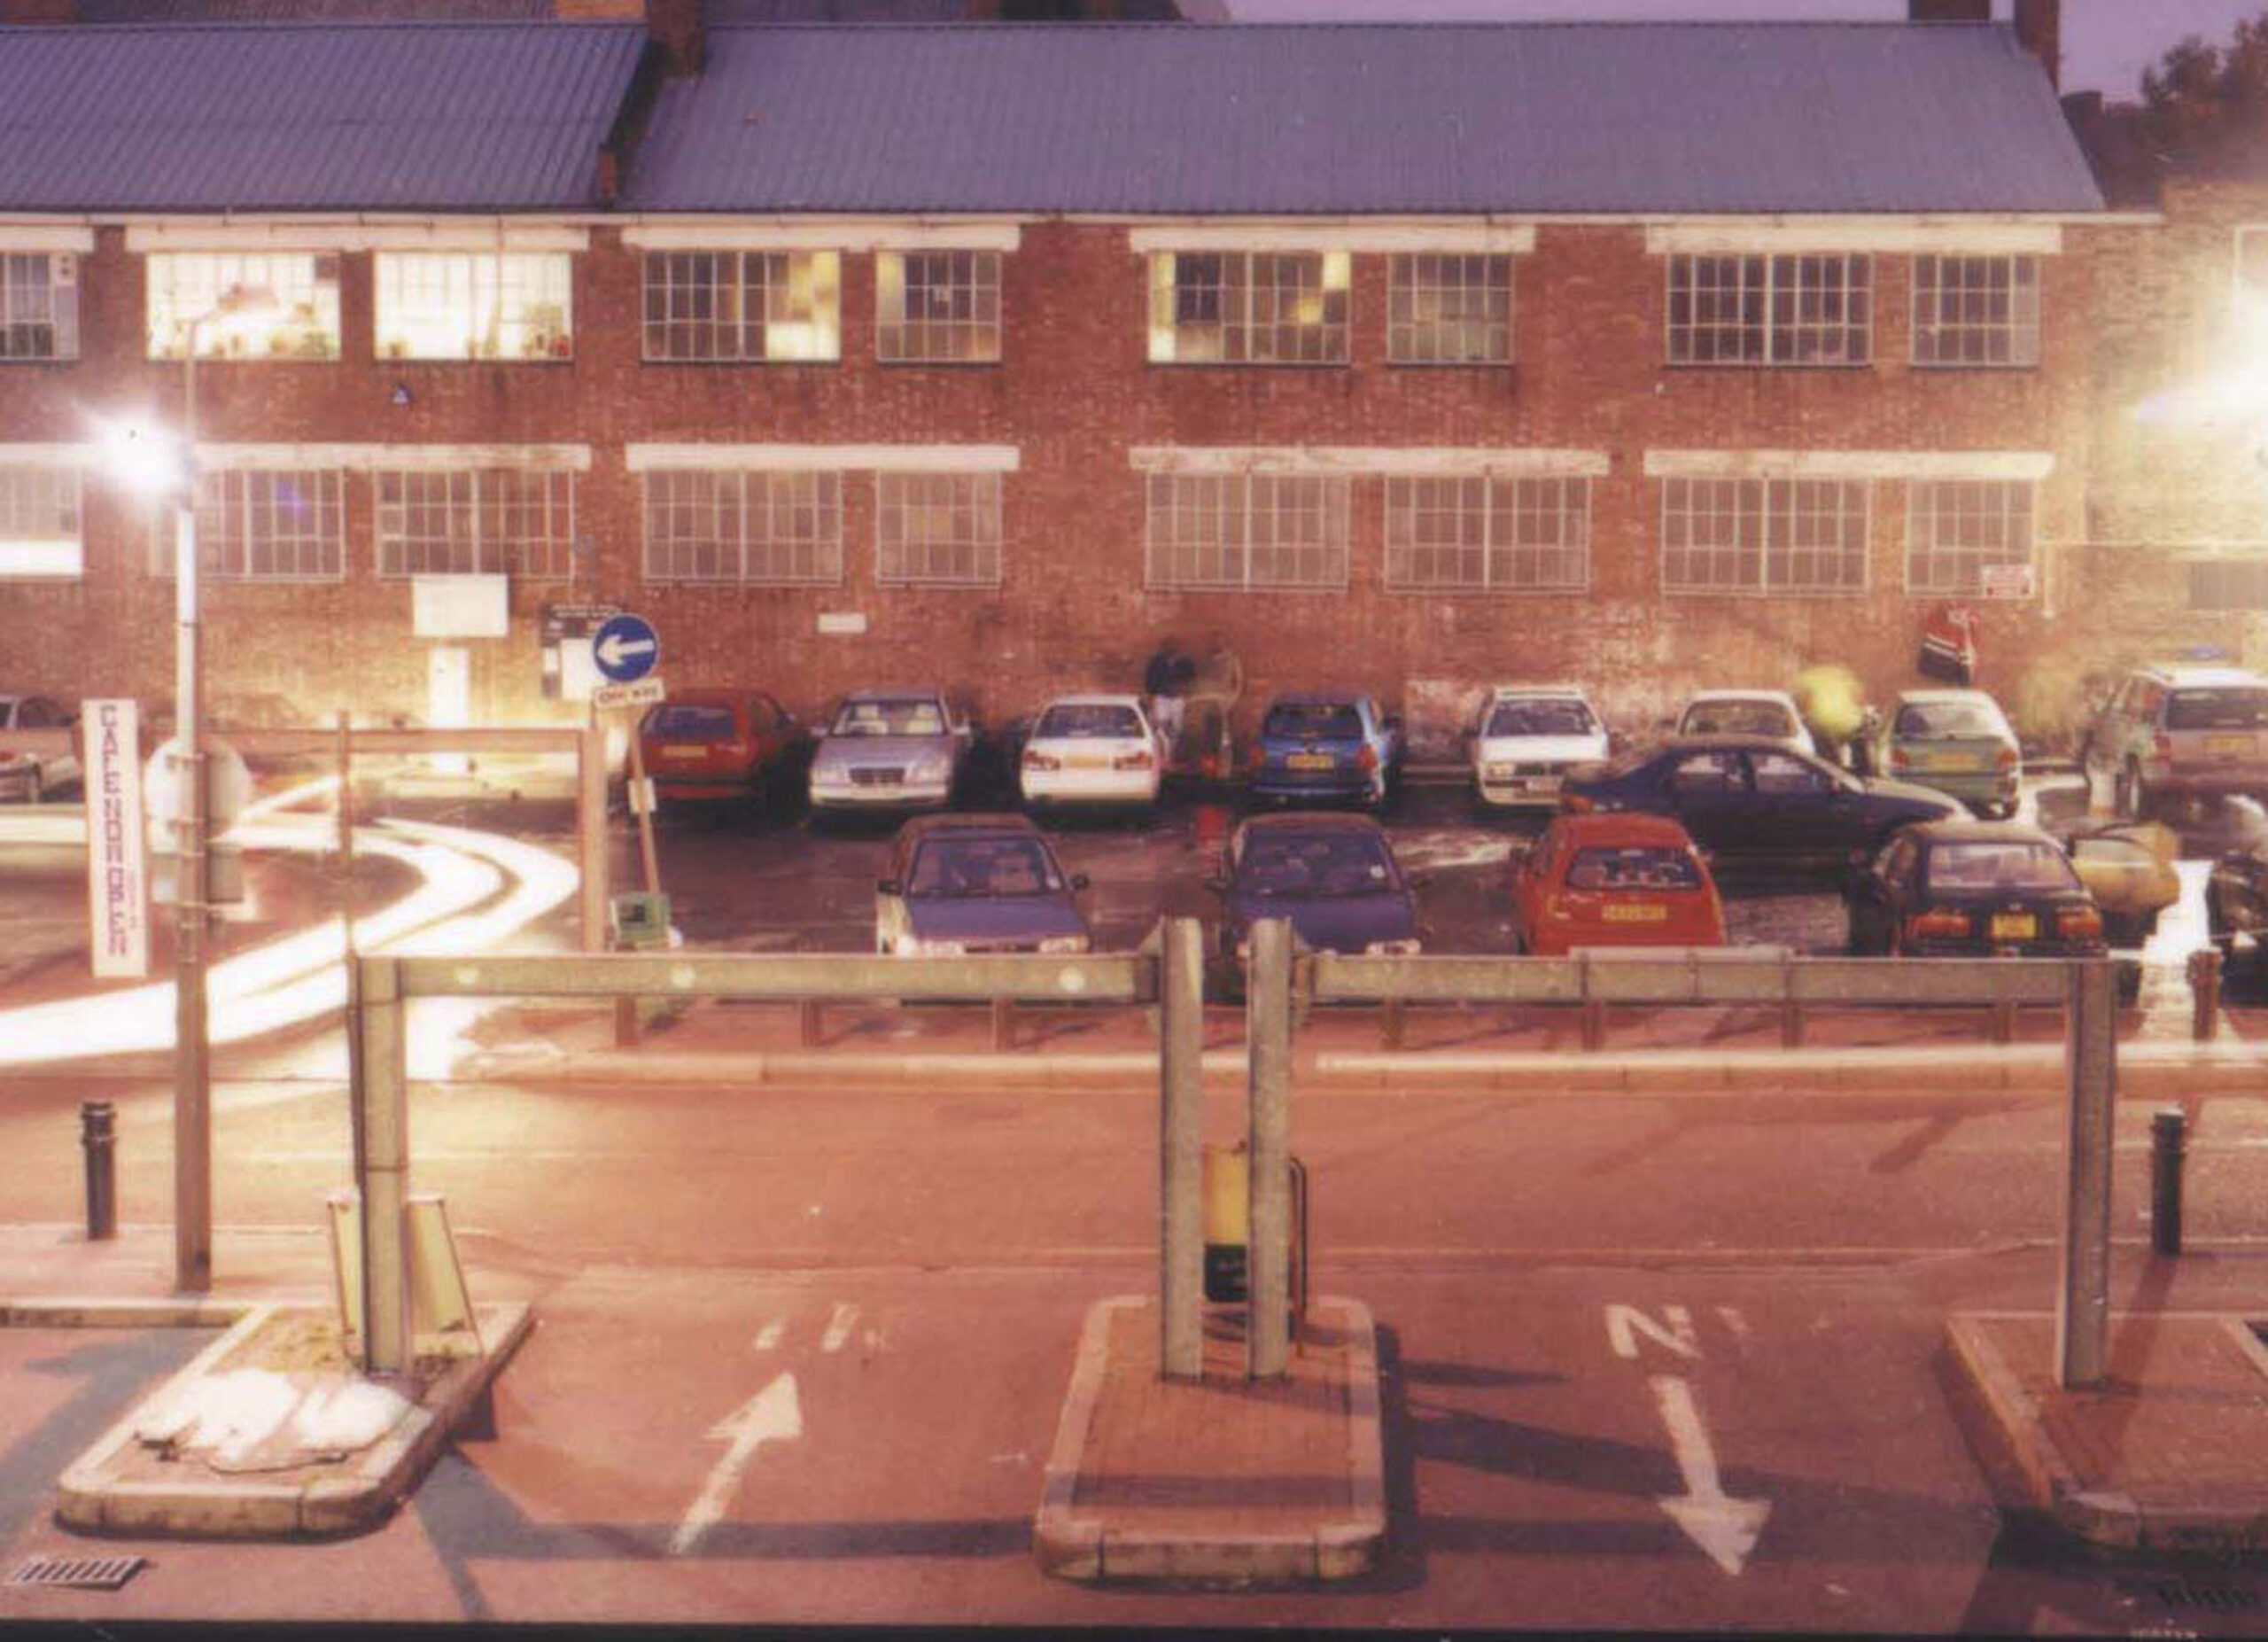 The previous derelict car park that was converted into a new town square